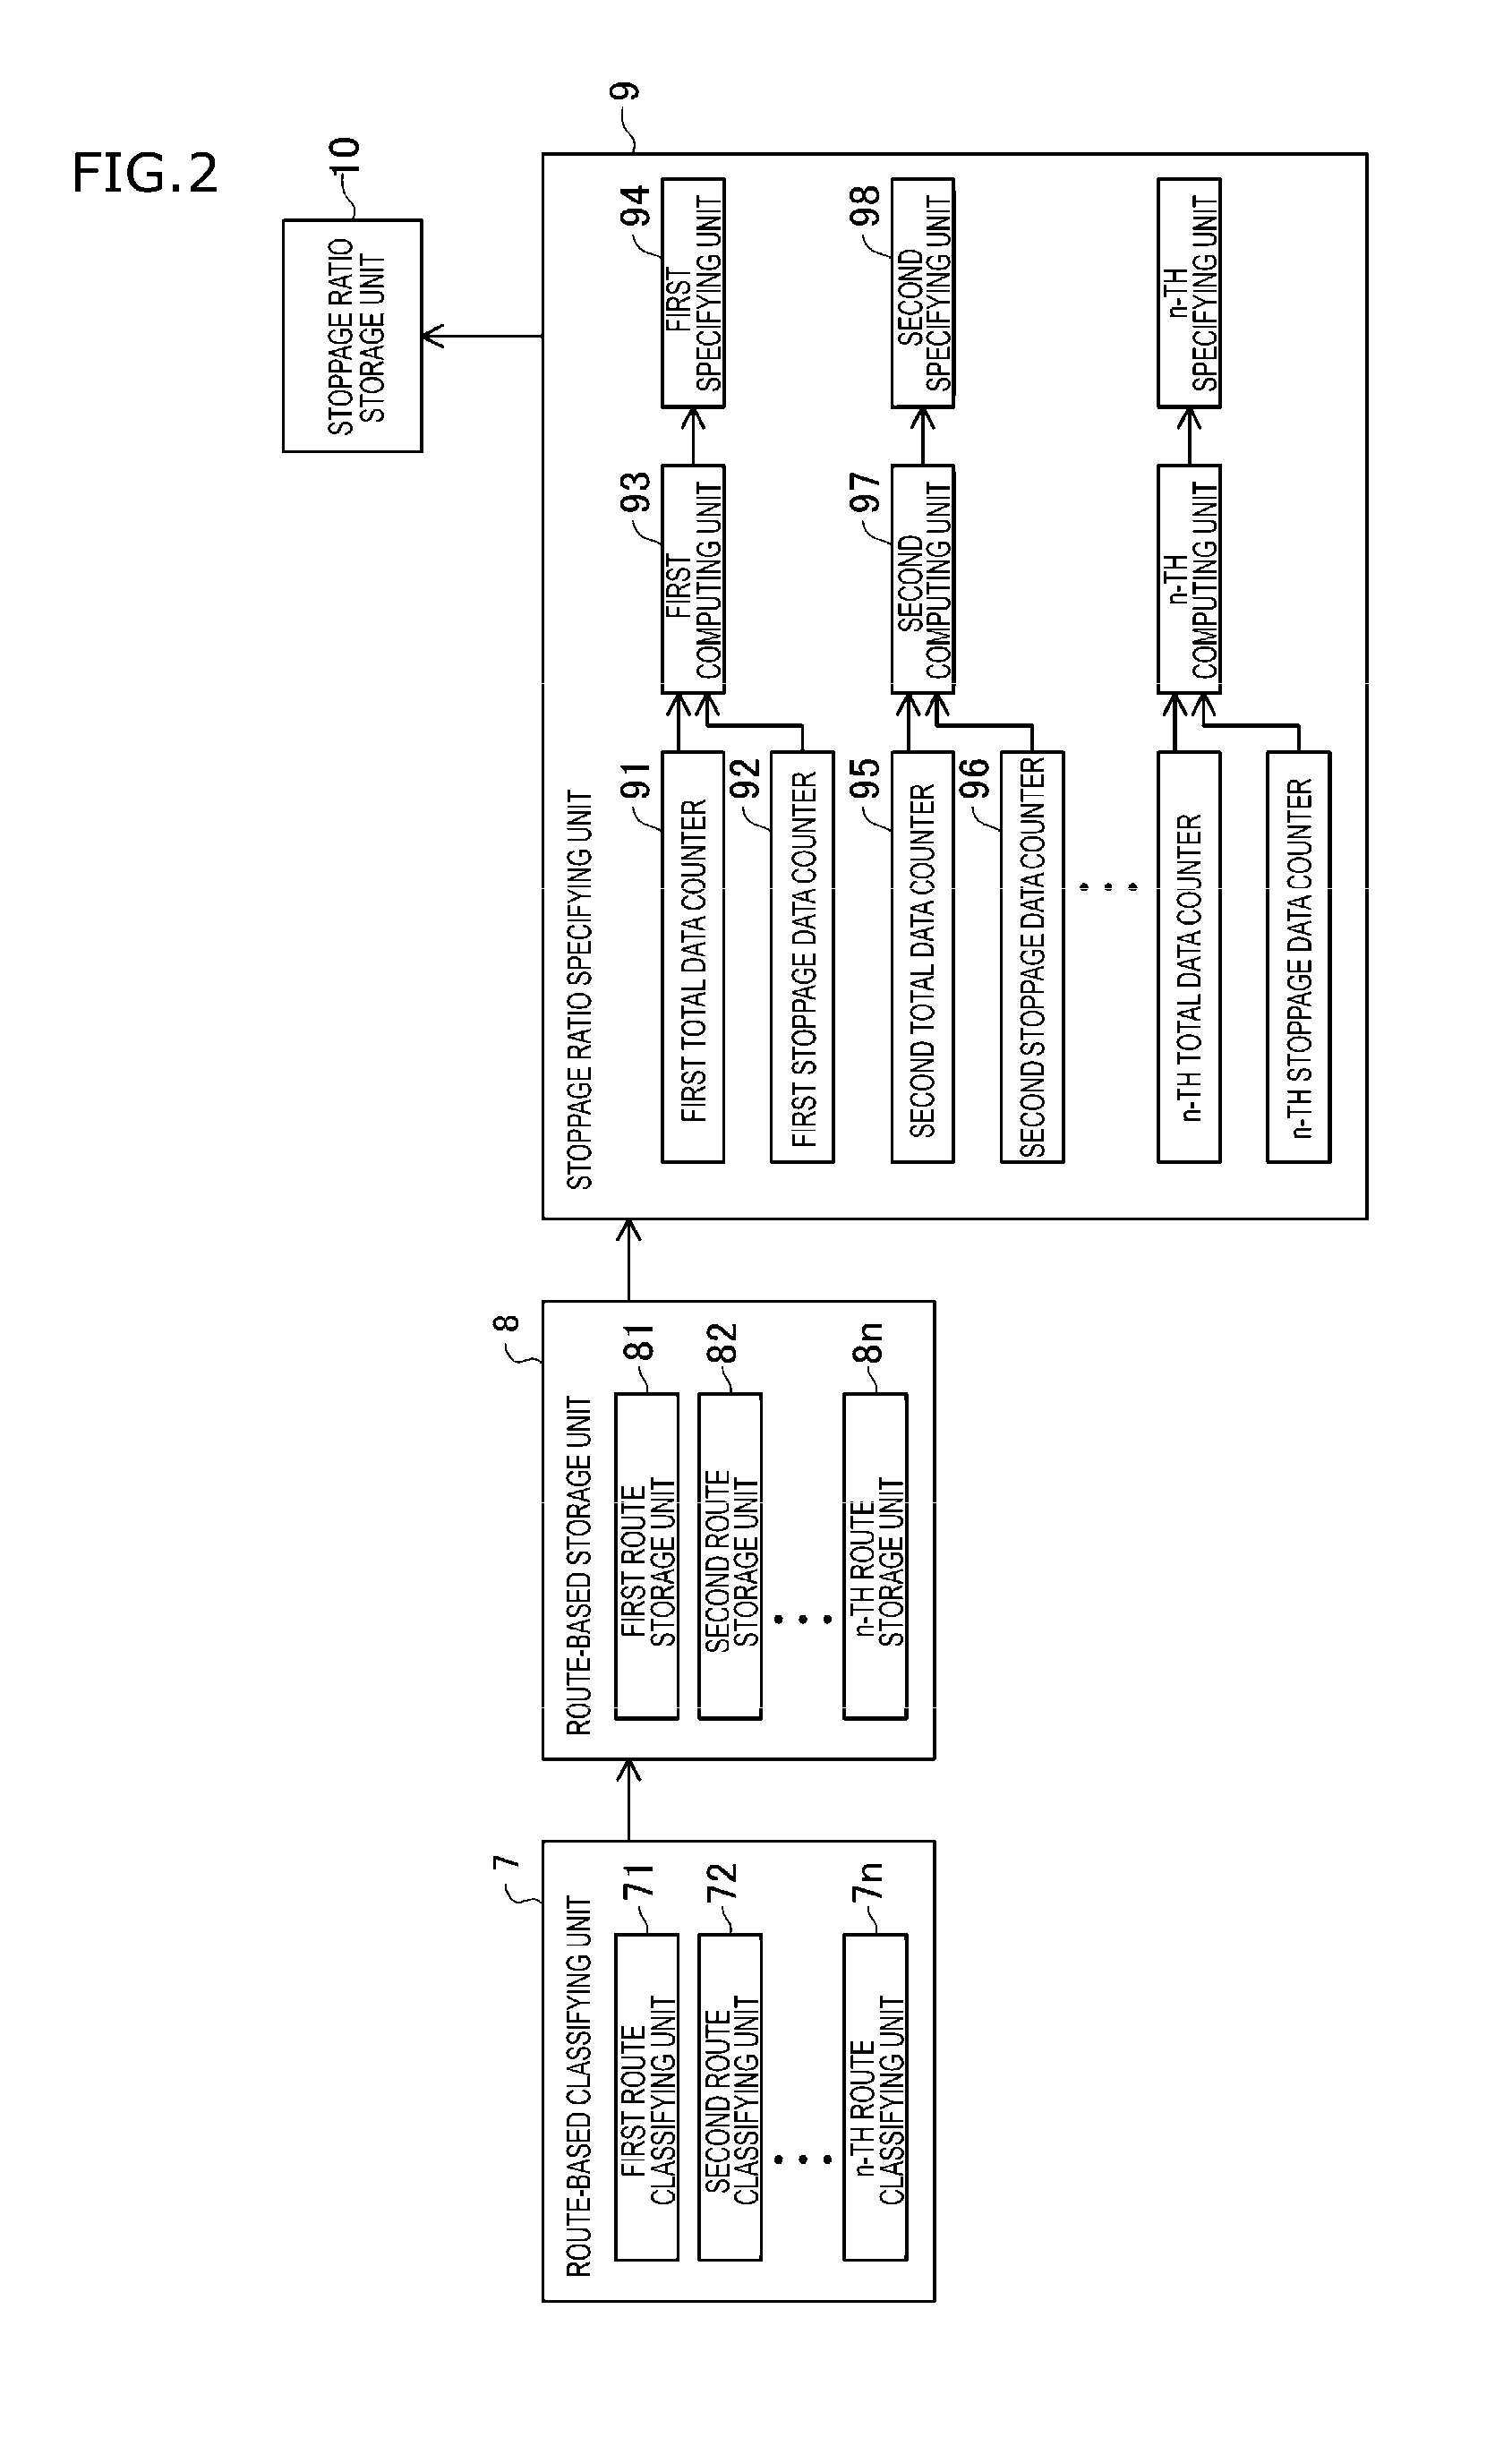 Intersection-Stopping-Rate Specifying Apparatus, Navigation Apparatus, Computer Program for Specifying Intersection-Stopping-Rate, Computer Program for Conducting Navigation